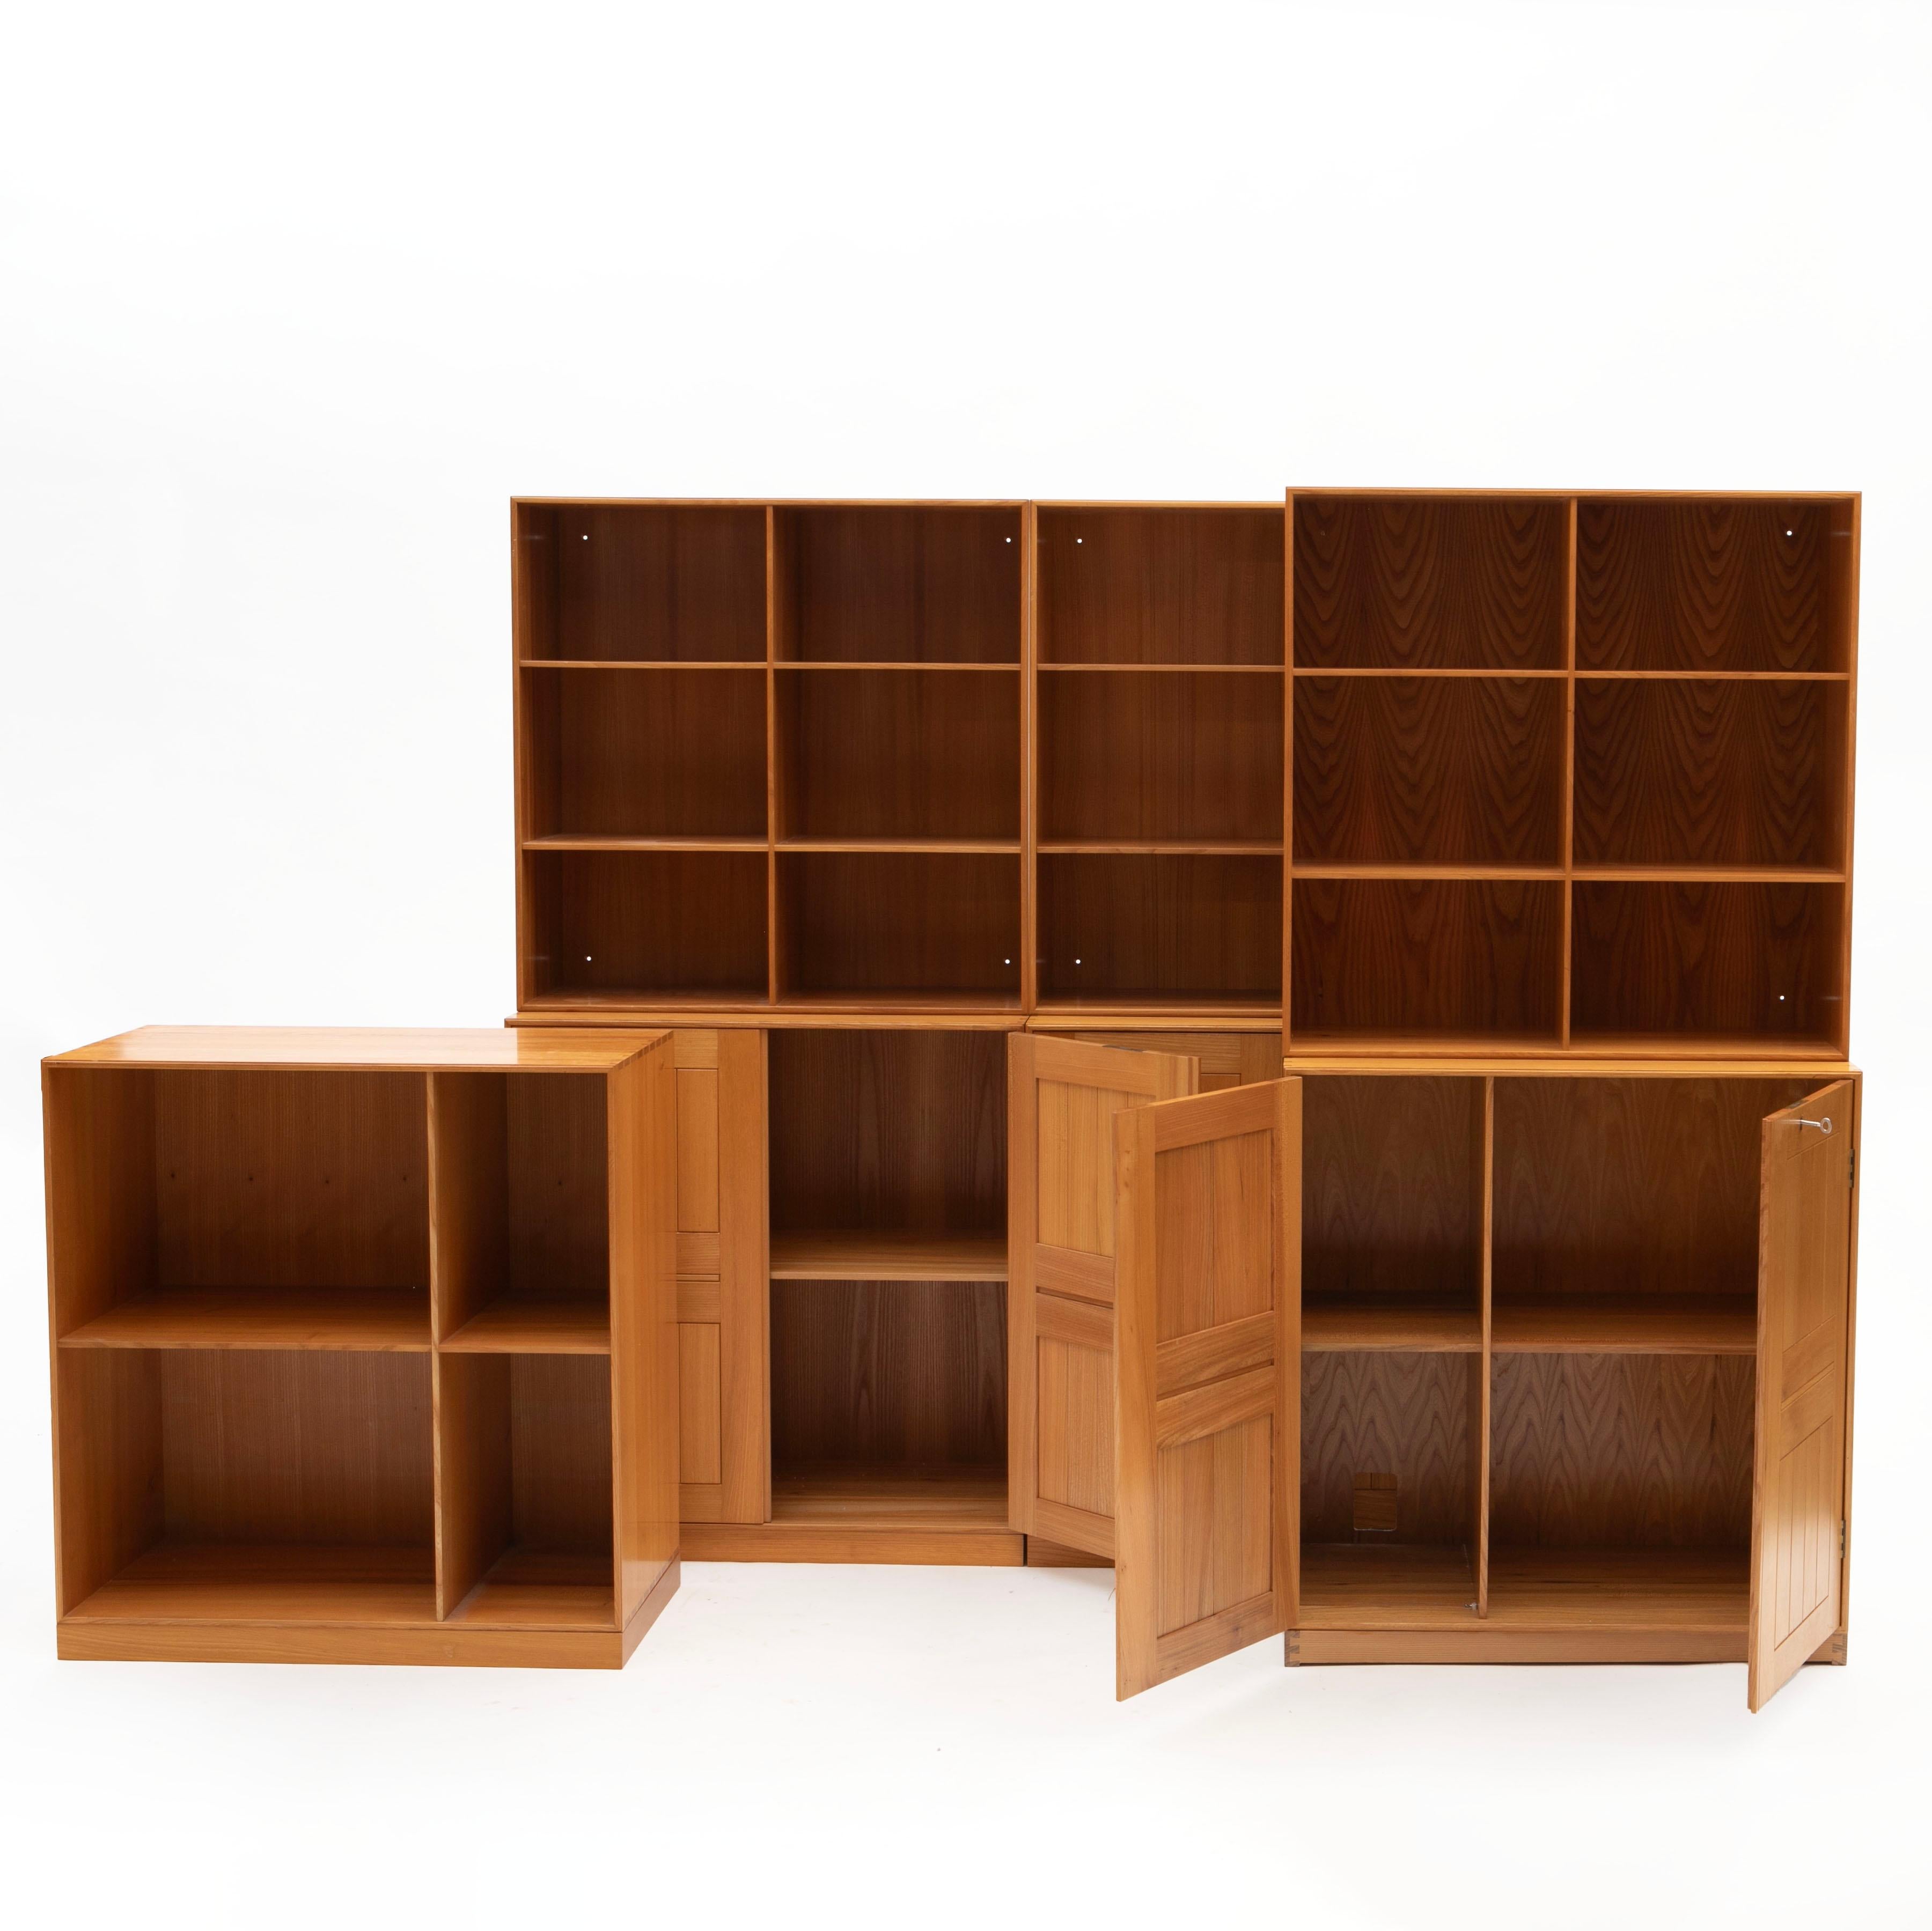 Mogens Koch, 1898-1992
Mogens Koch storage system in ash wood manufactured by Rud. Rasmussen, 1960-1970.
Set of three cabinets, three bookcases + 1 bookcase in the same size as cupboards (76x76x36 cm) on three plinths. All crafted in patinated solid